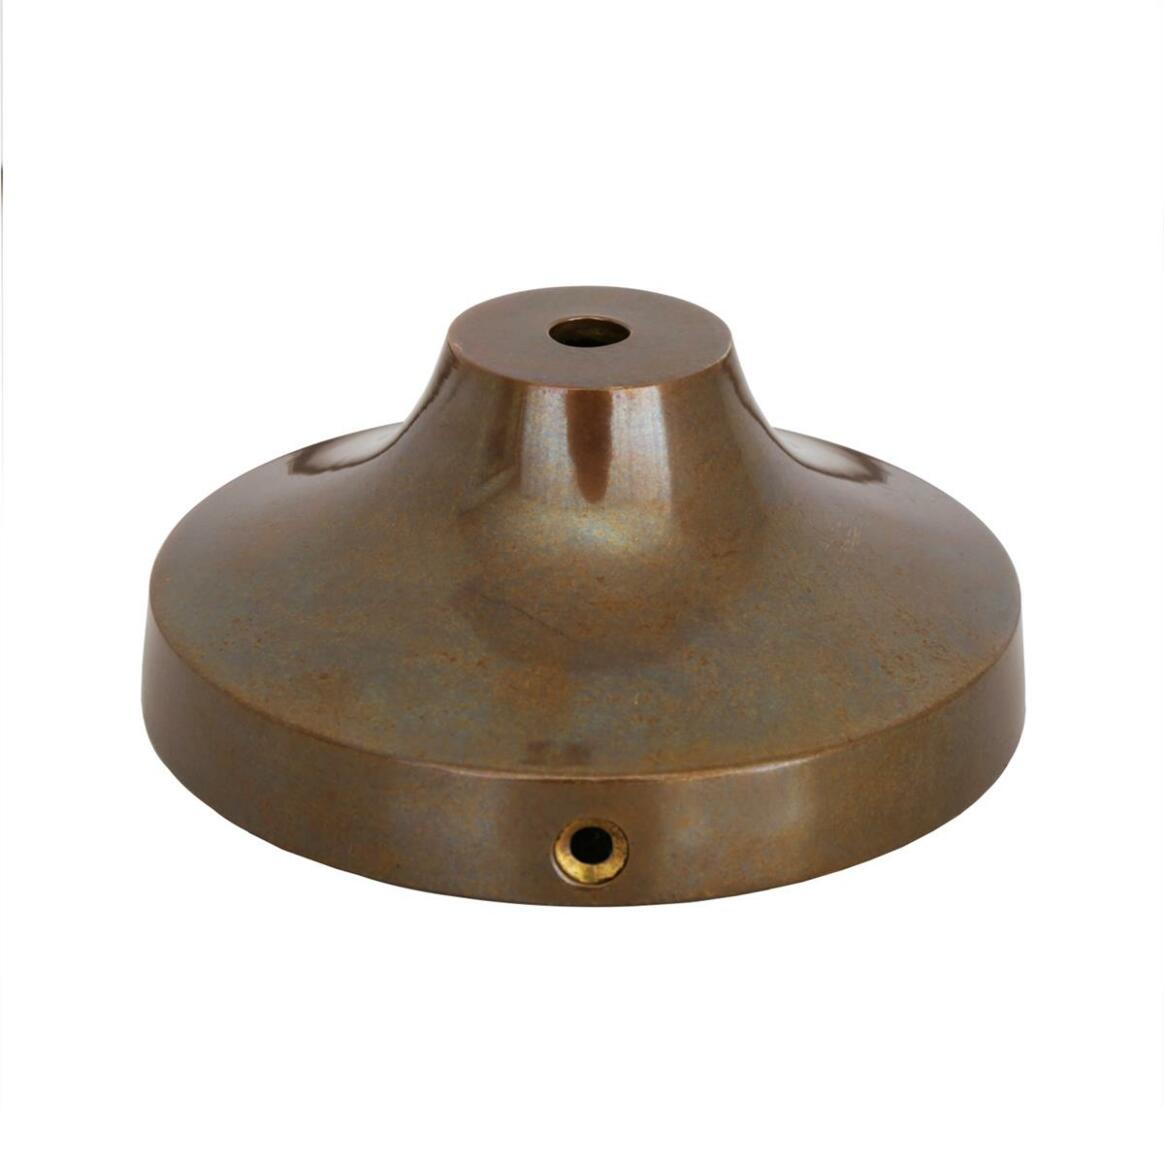 Cast cone wall bracket 4.5" main product image